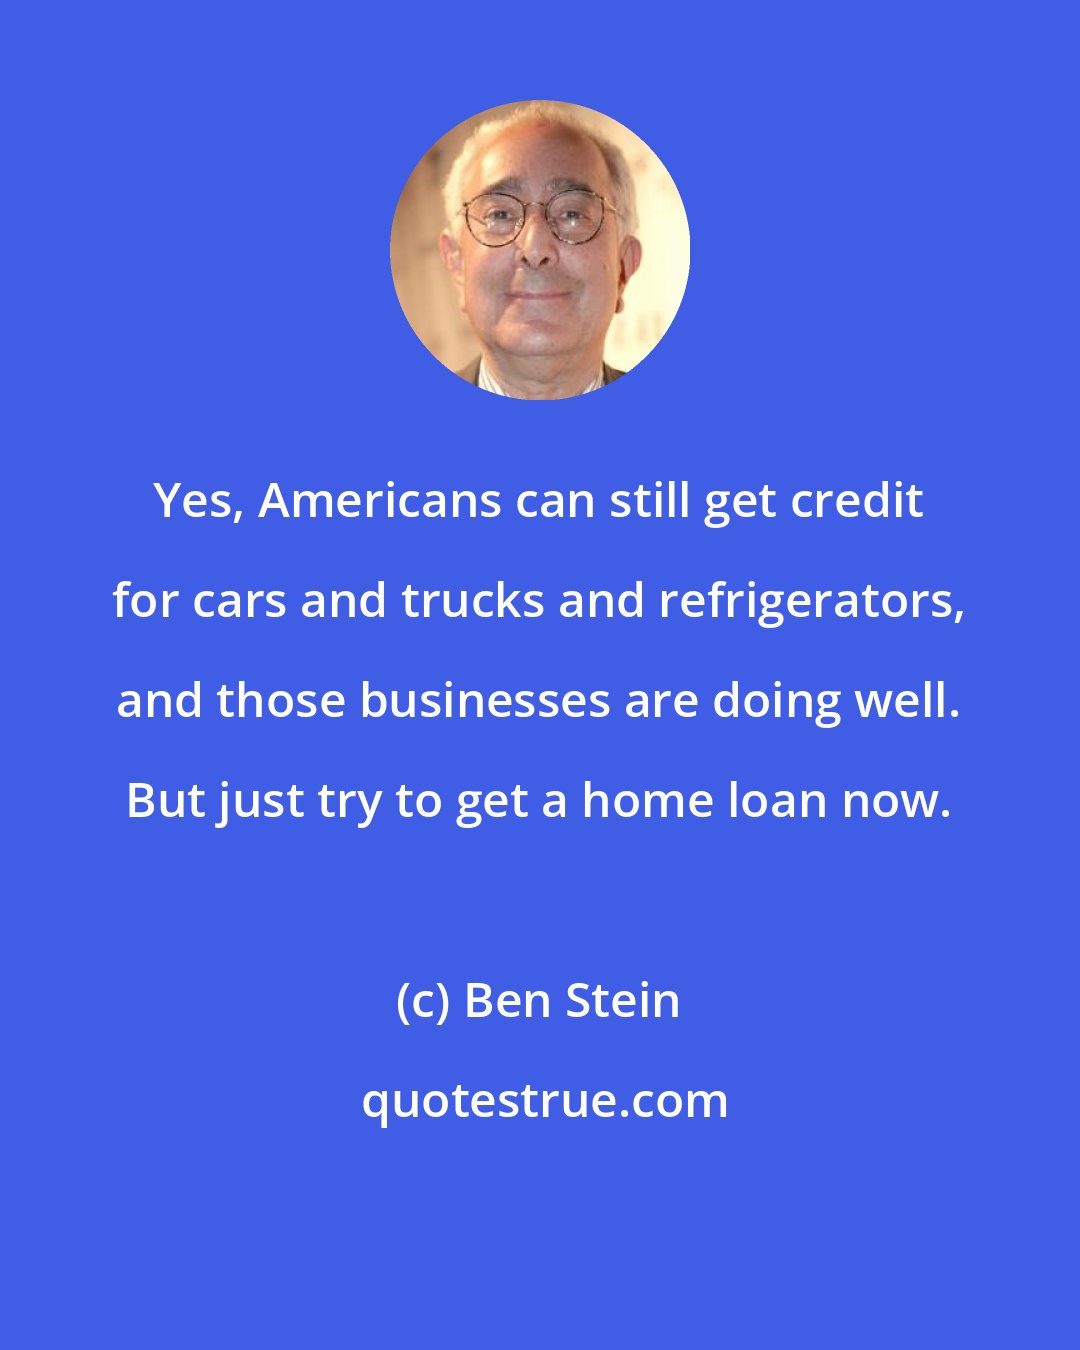 Ben Stein: Yes, Americans can still get credit for cars and trucks and refrigerators, and those businesses are doing well. But just try to get a home loan now.